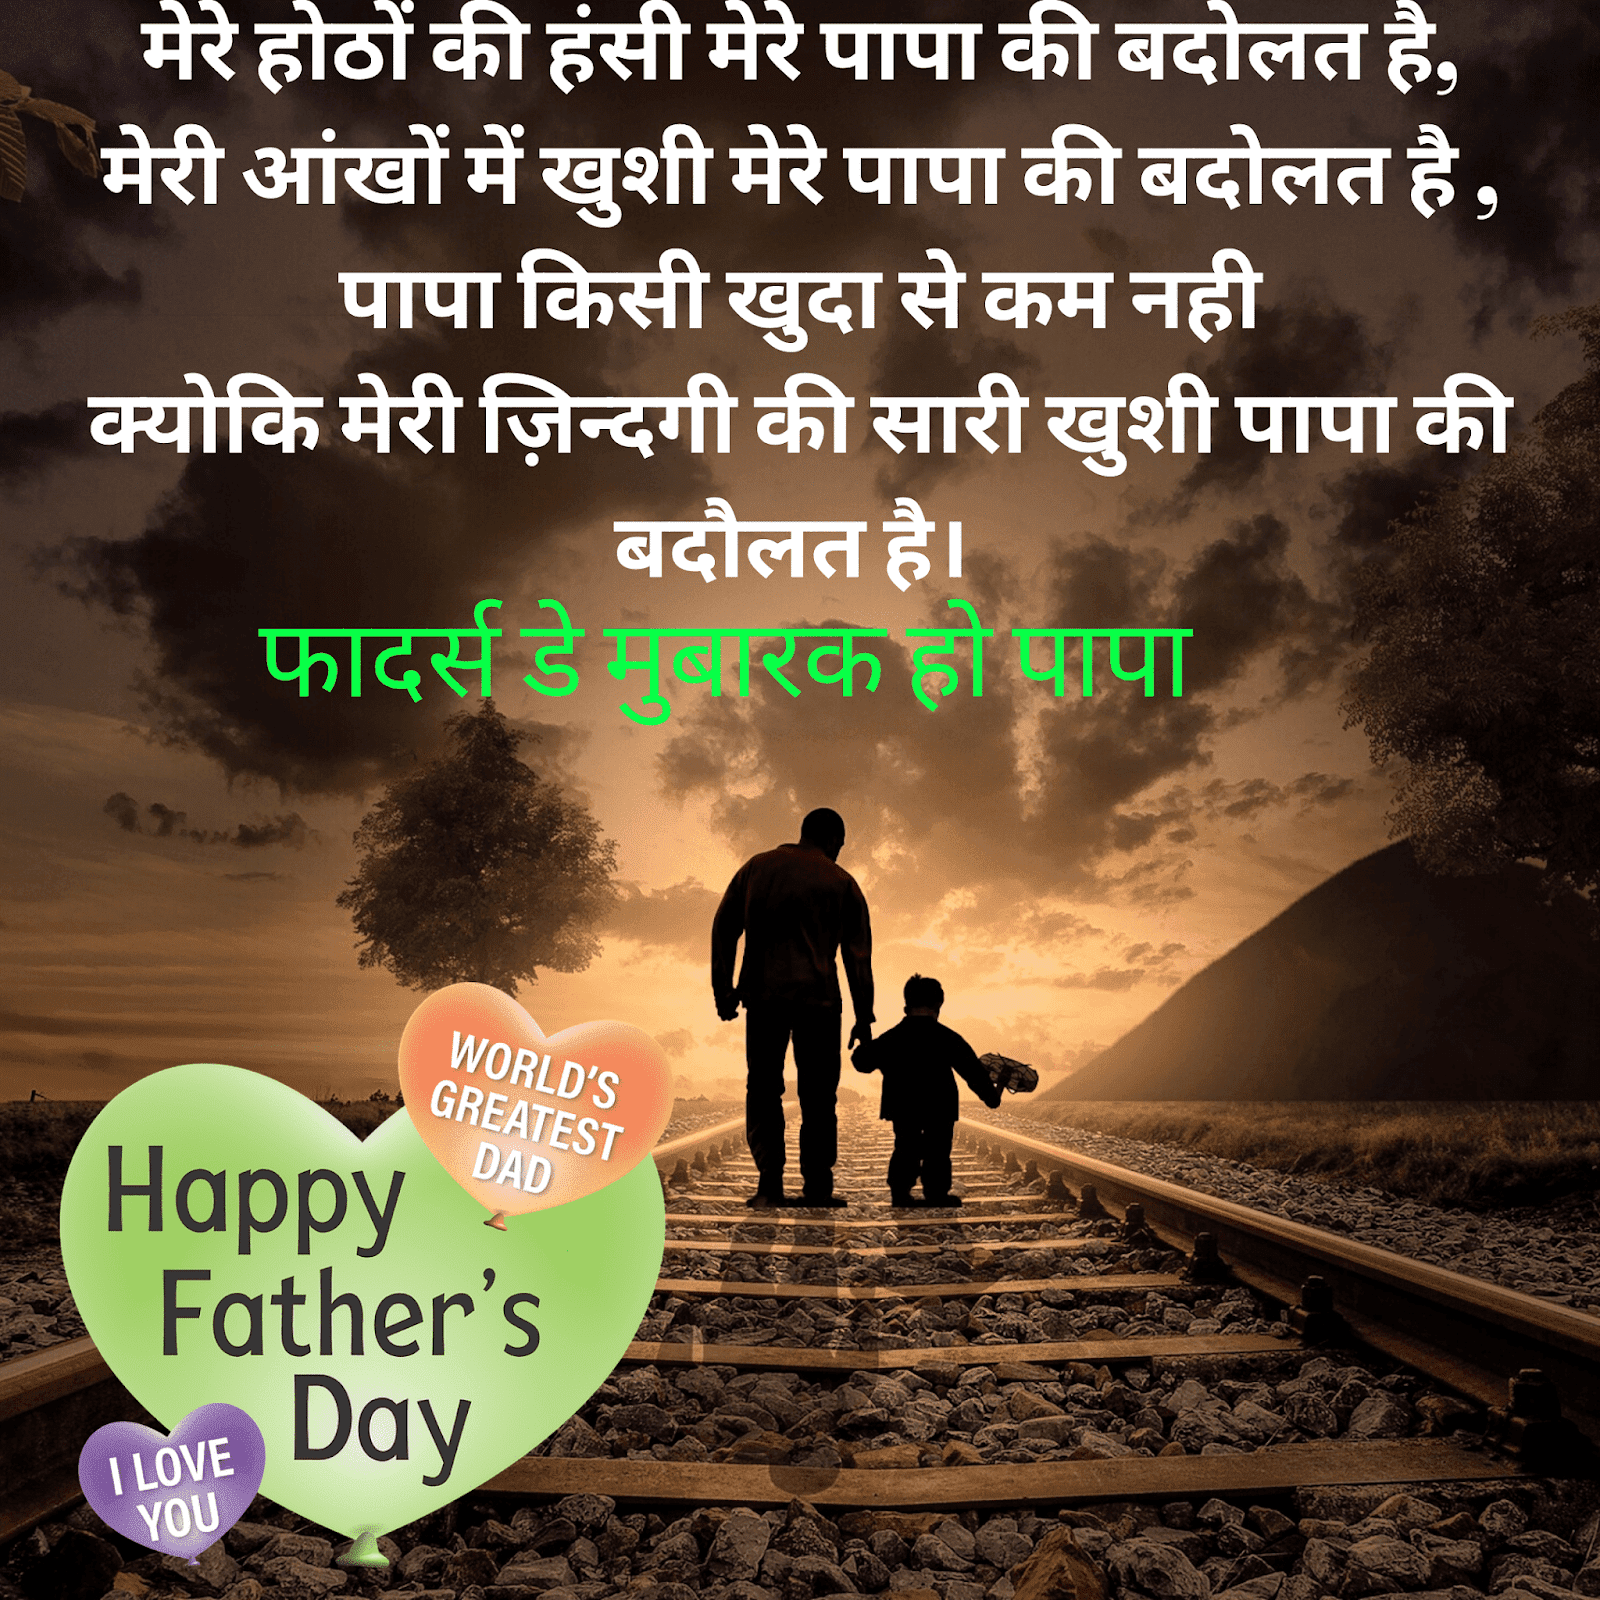 Happy Fathers Day Images In Hindi